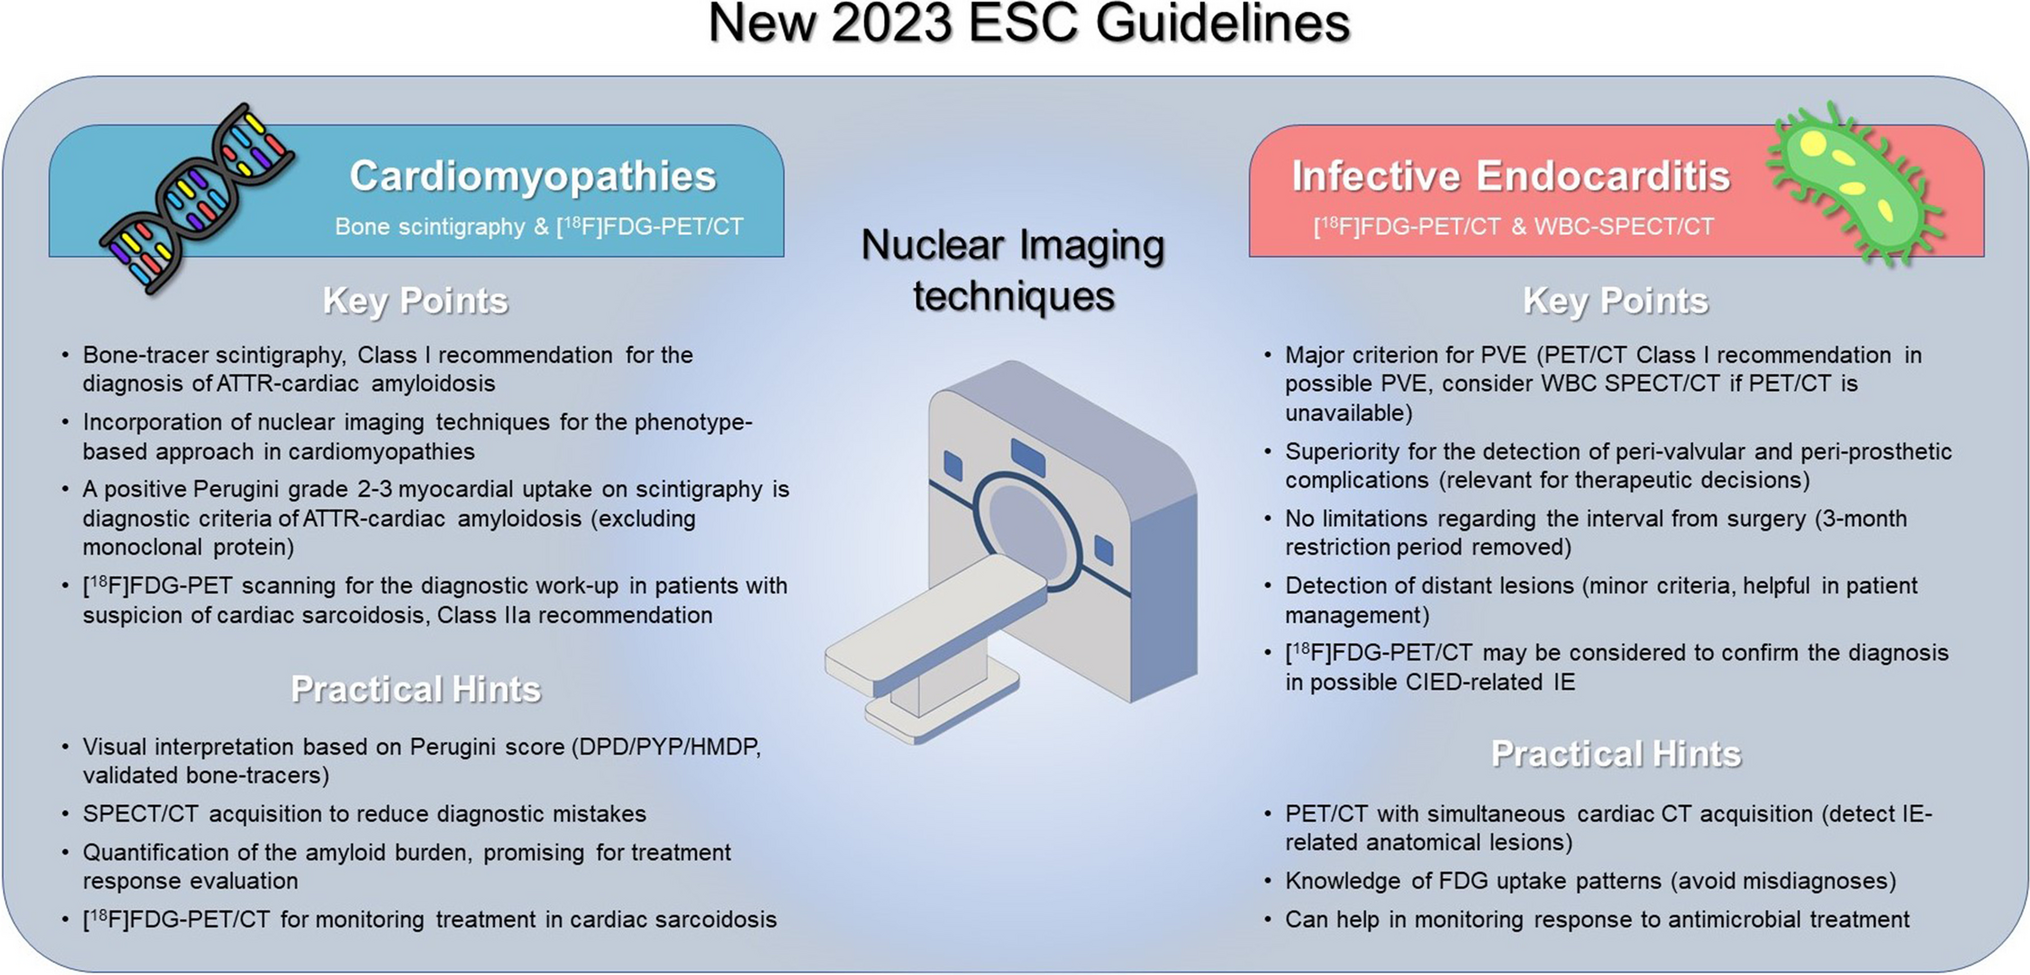 Nuclear imaging in the new ESC Guidelines: the age of maturity